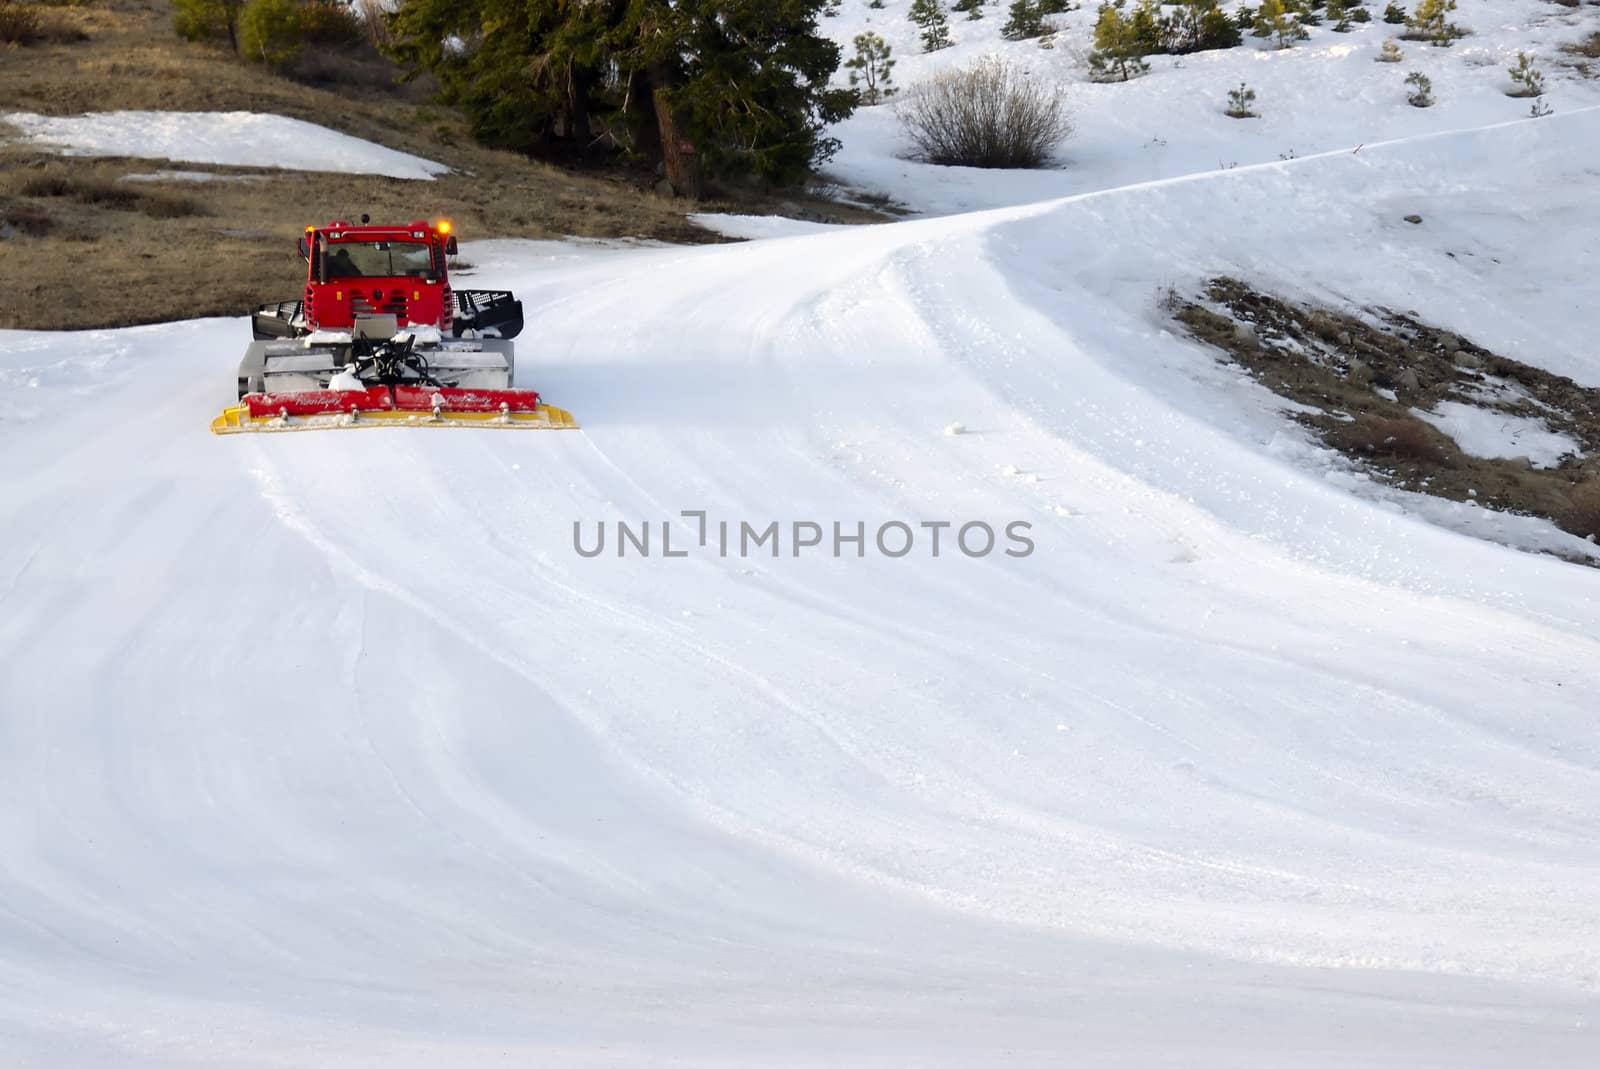 A red snow plow drives up a wintry mountain